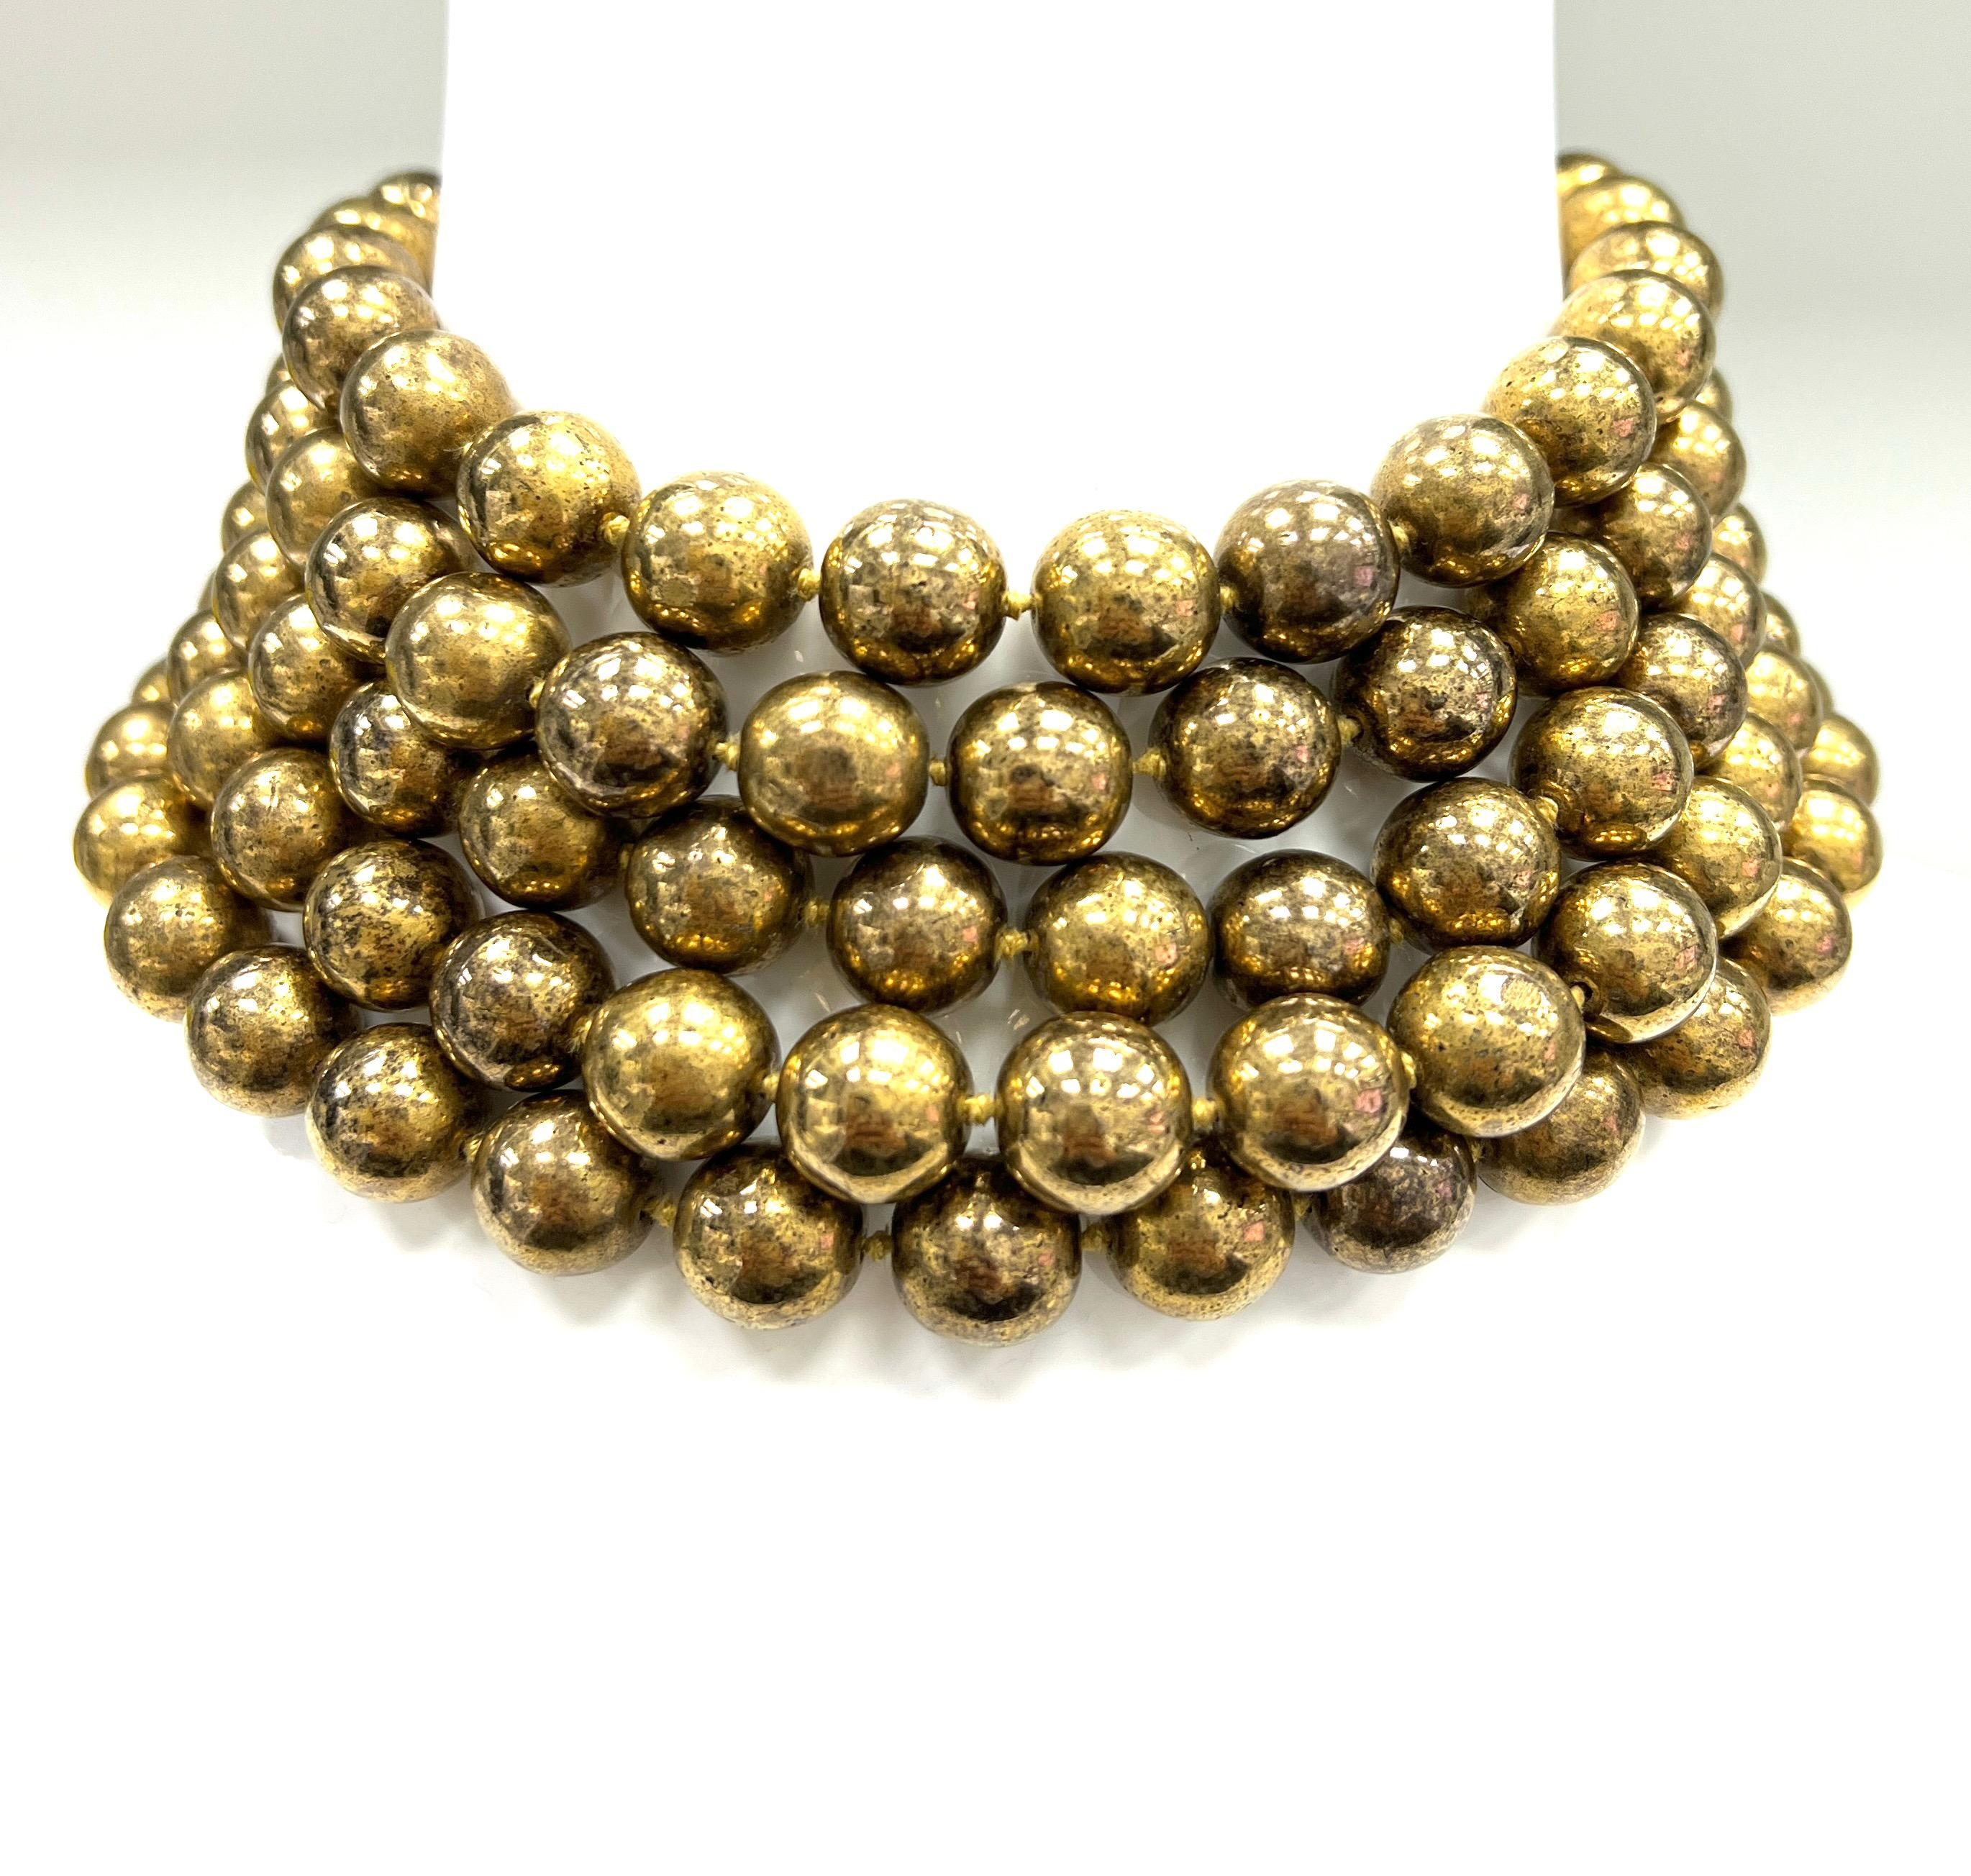 Chanel vintage gilt-metal bead necklace, made in France

Five-strand gilt-metal beads (13 mm), forming a wide choker; marked Chanel, 23, made in France

Size: width 2.5 inches, length 14 inches
Total weight: 390.2 grams